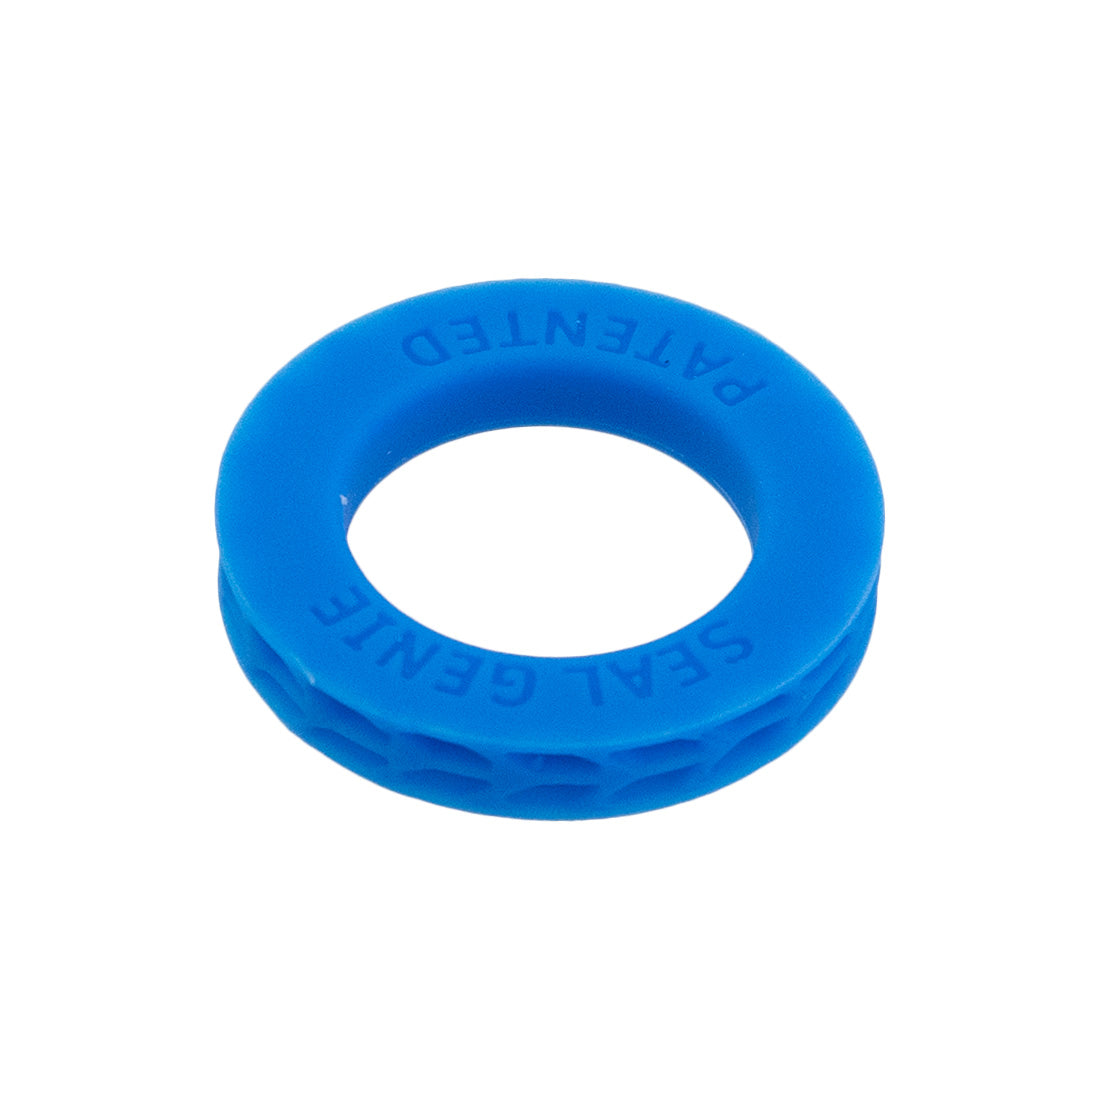 Seal Genie Silicone Hose Gasket - Pack of 10 Side Oblique View